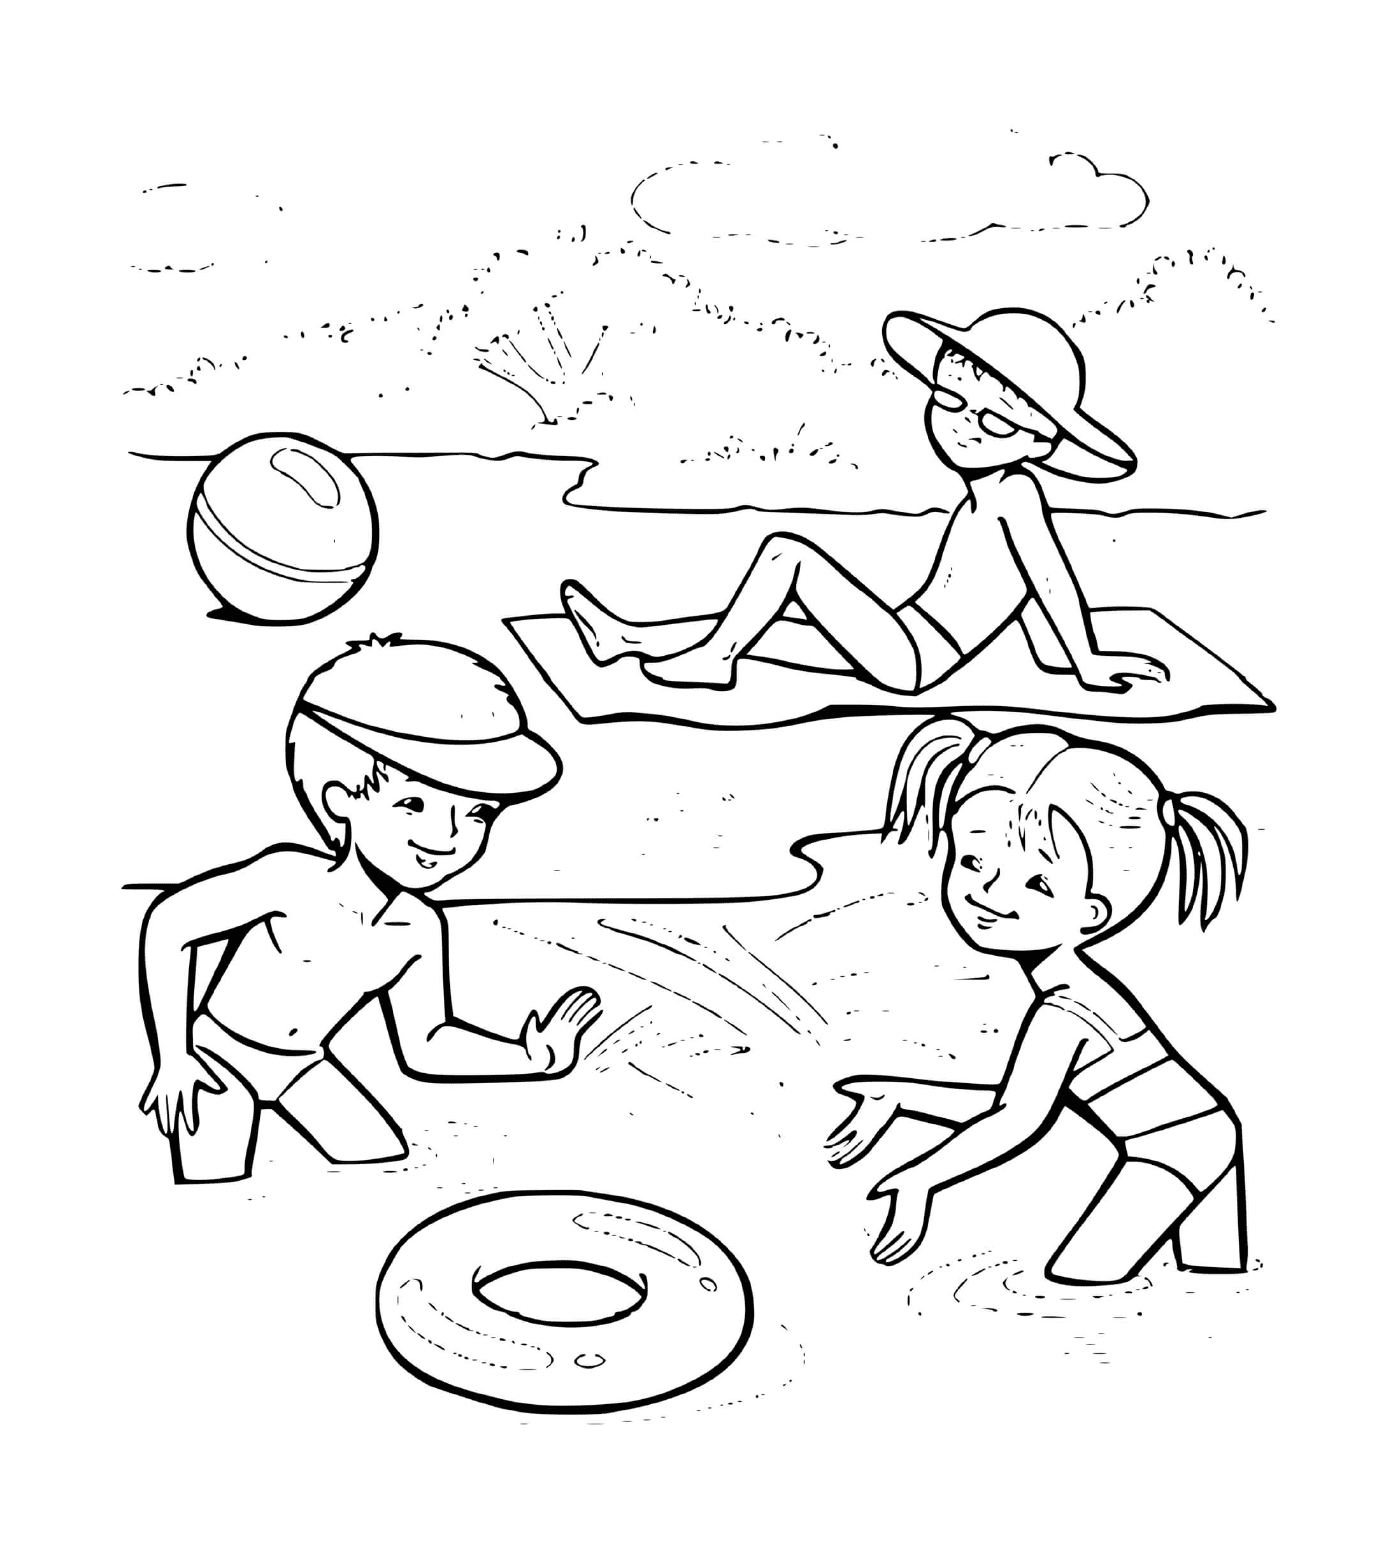  Children playing on the beach 